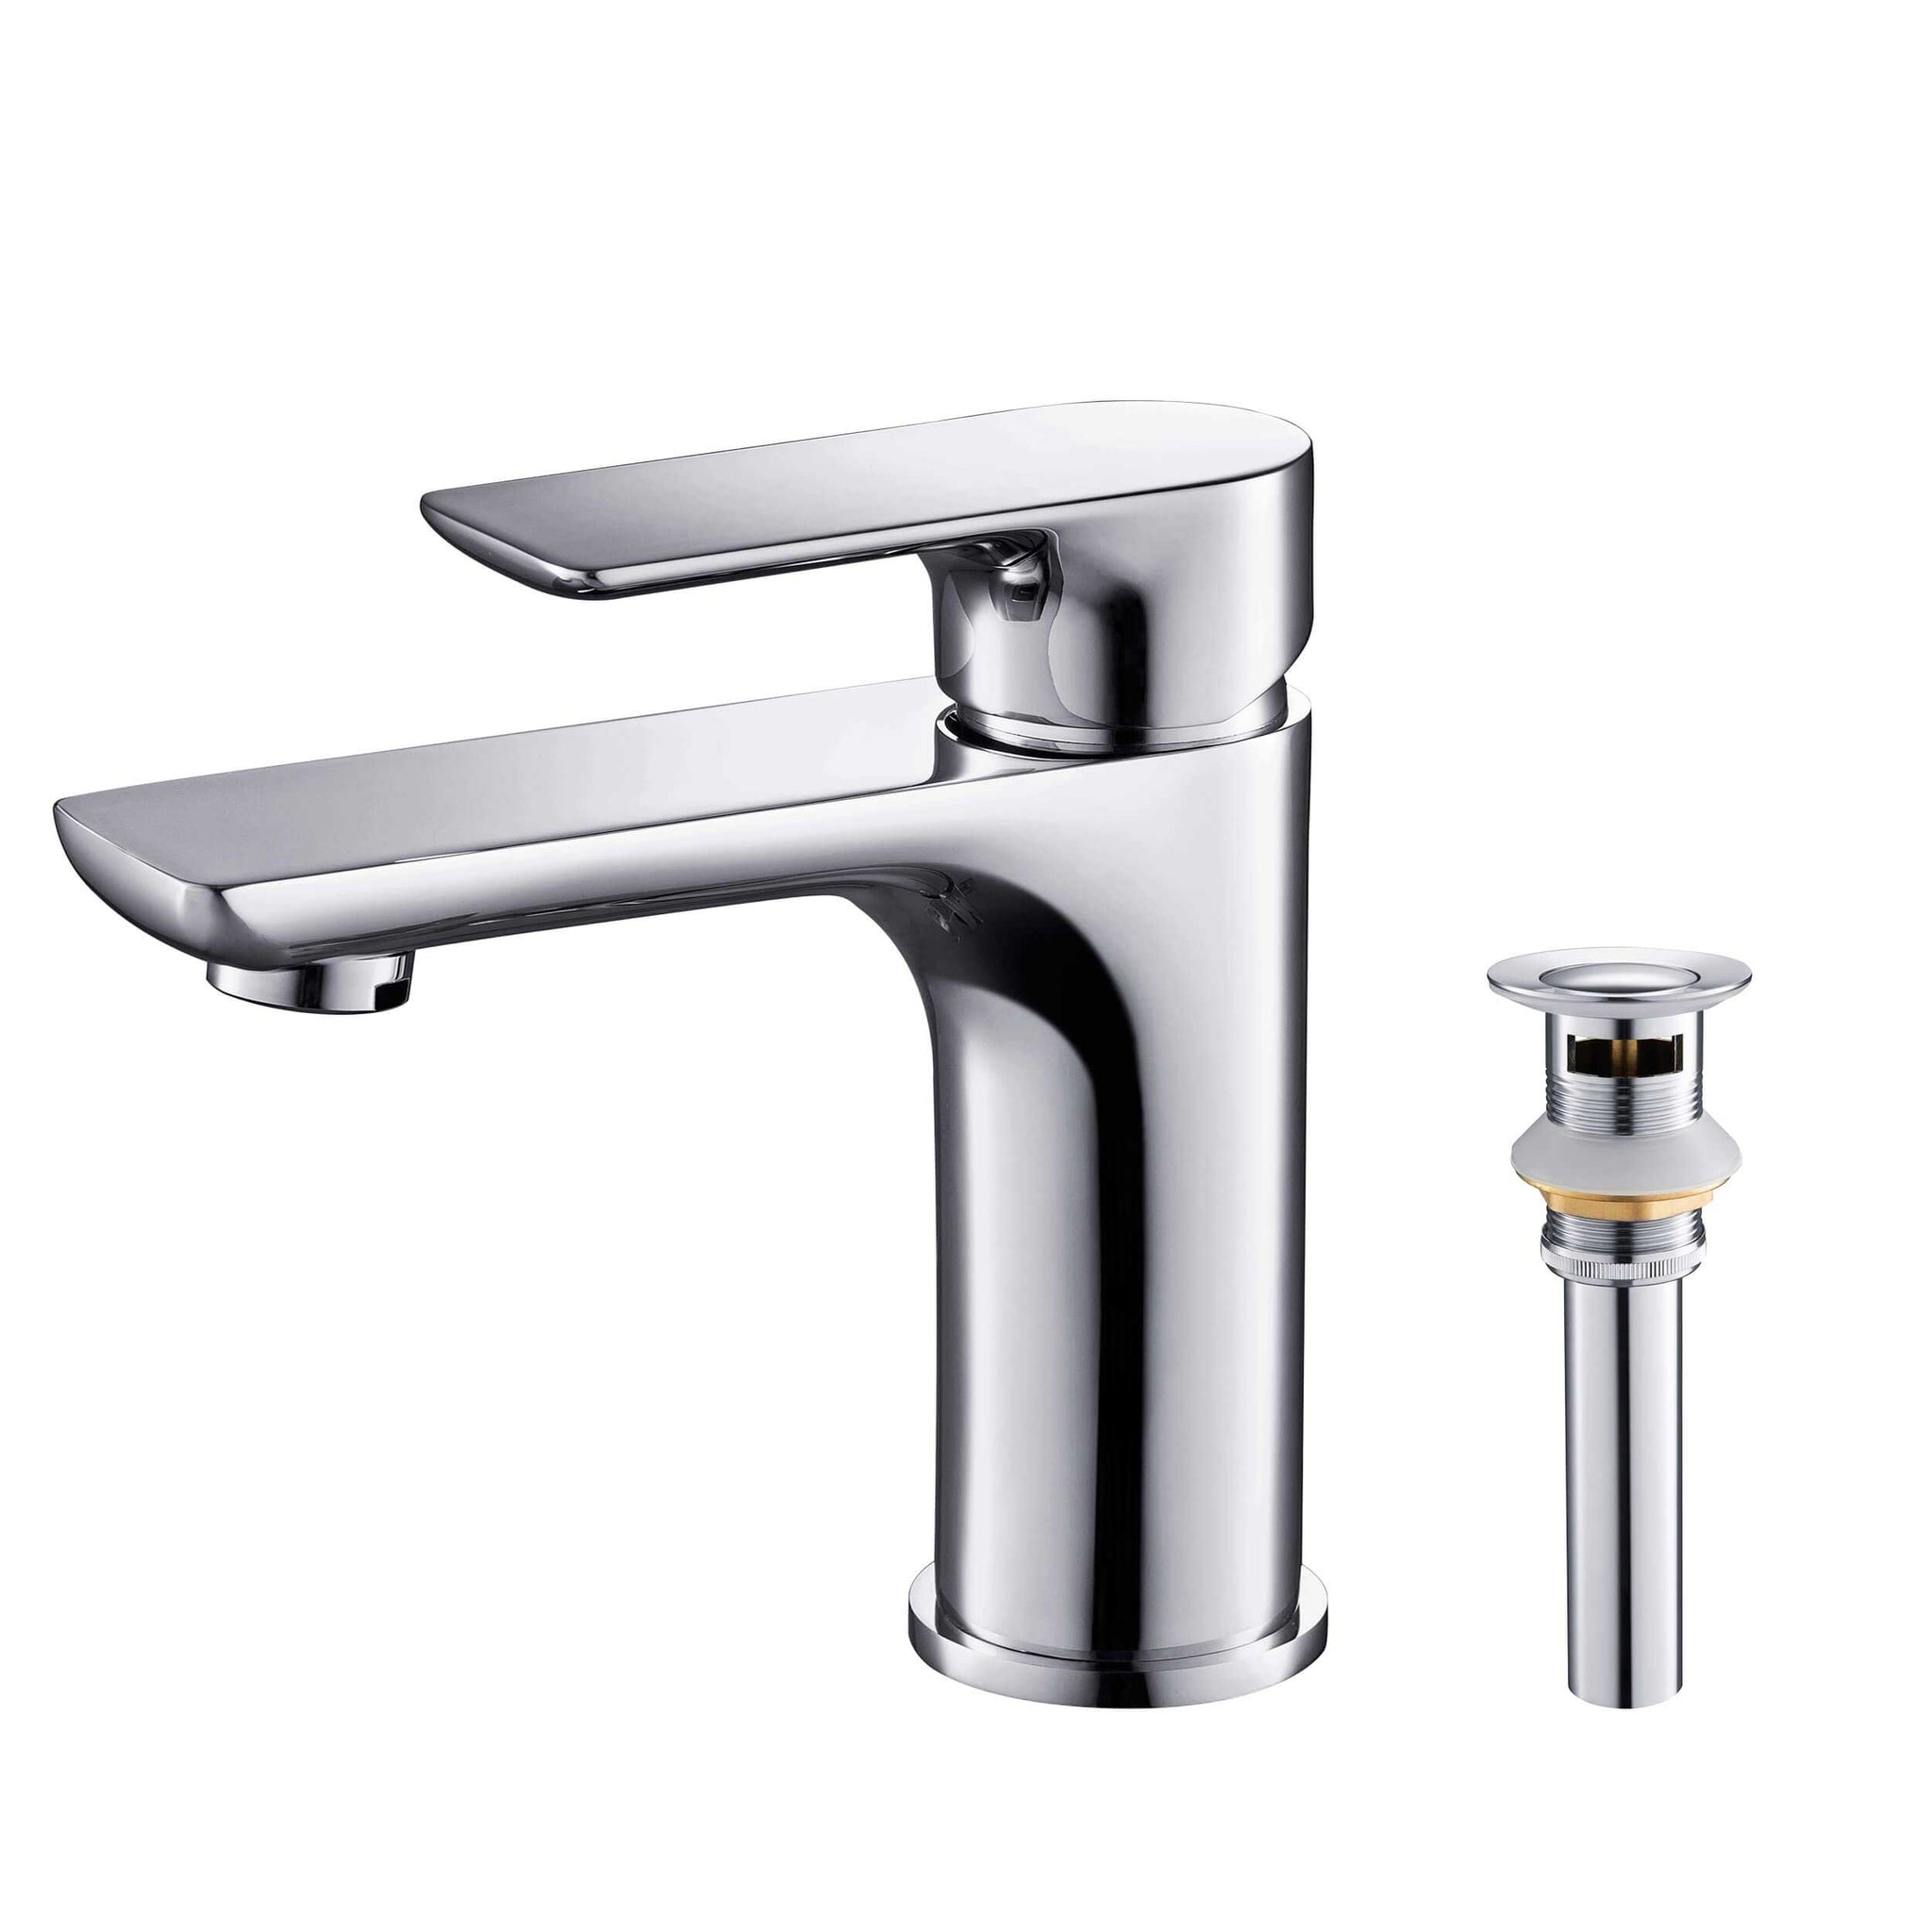 KIBI, KIBI Tender Single Handle Chrome Solid Brass Bathroom Sink Faucet With Pop-Up Drain Stopper Small Cover With Overflow